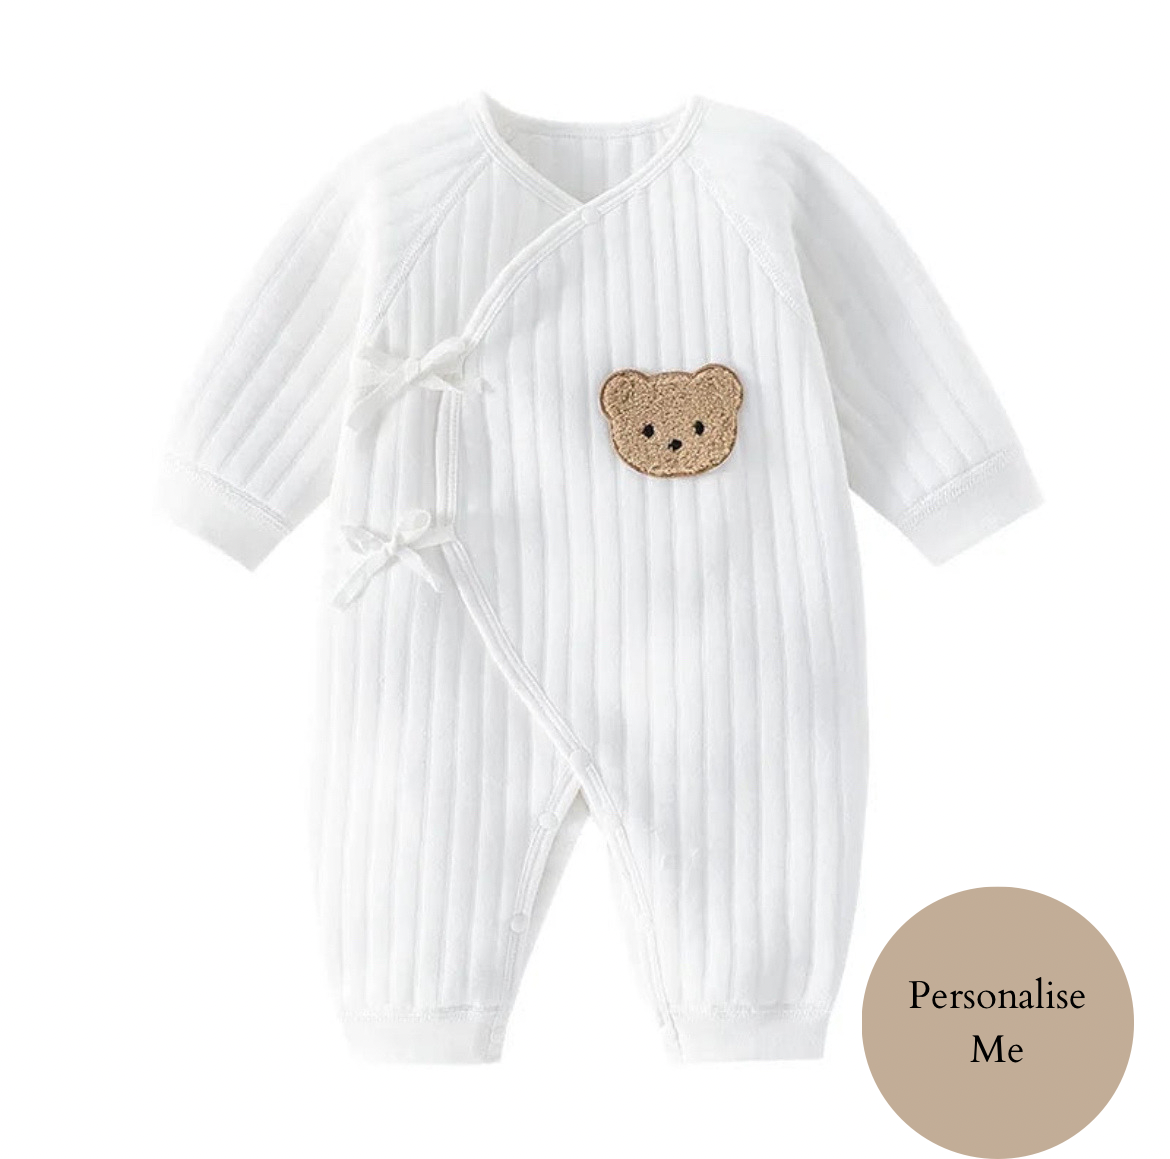 Auroratots - The perfect apparel for your baby's growing wardrobe